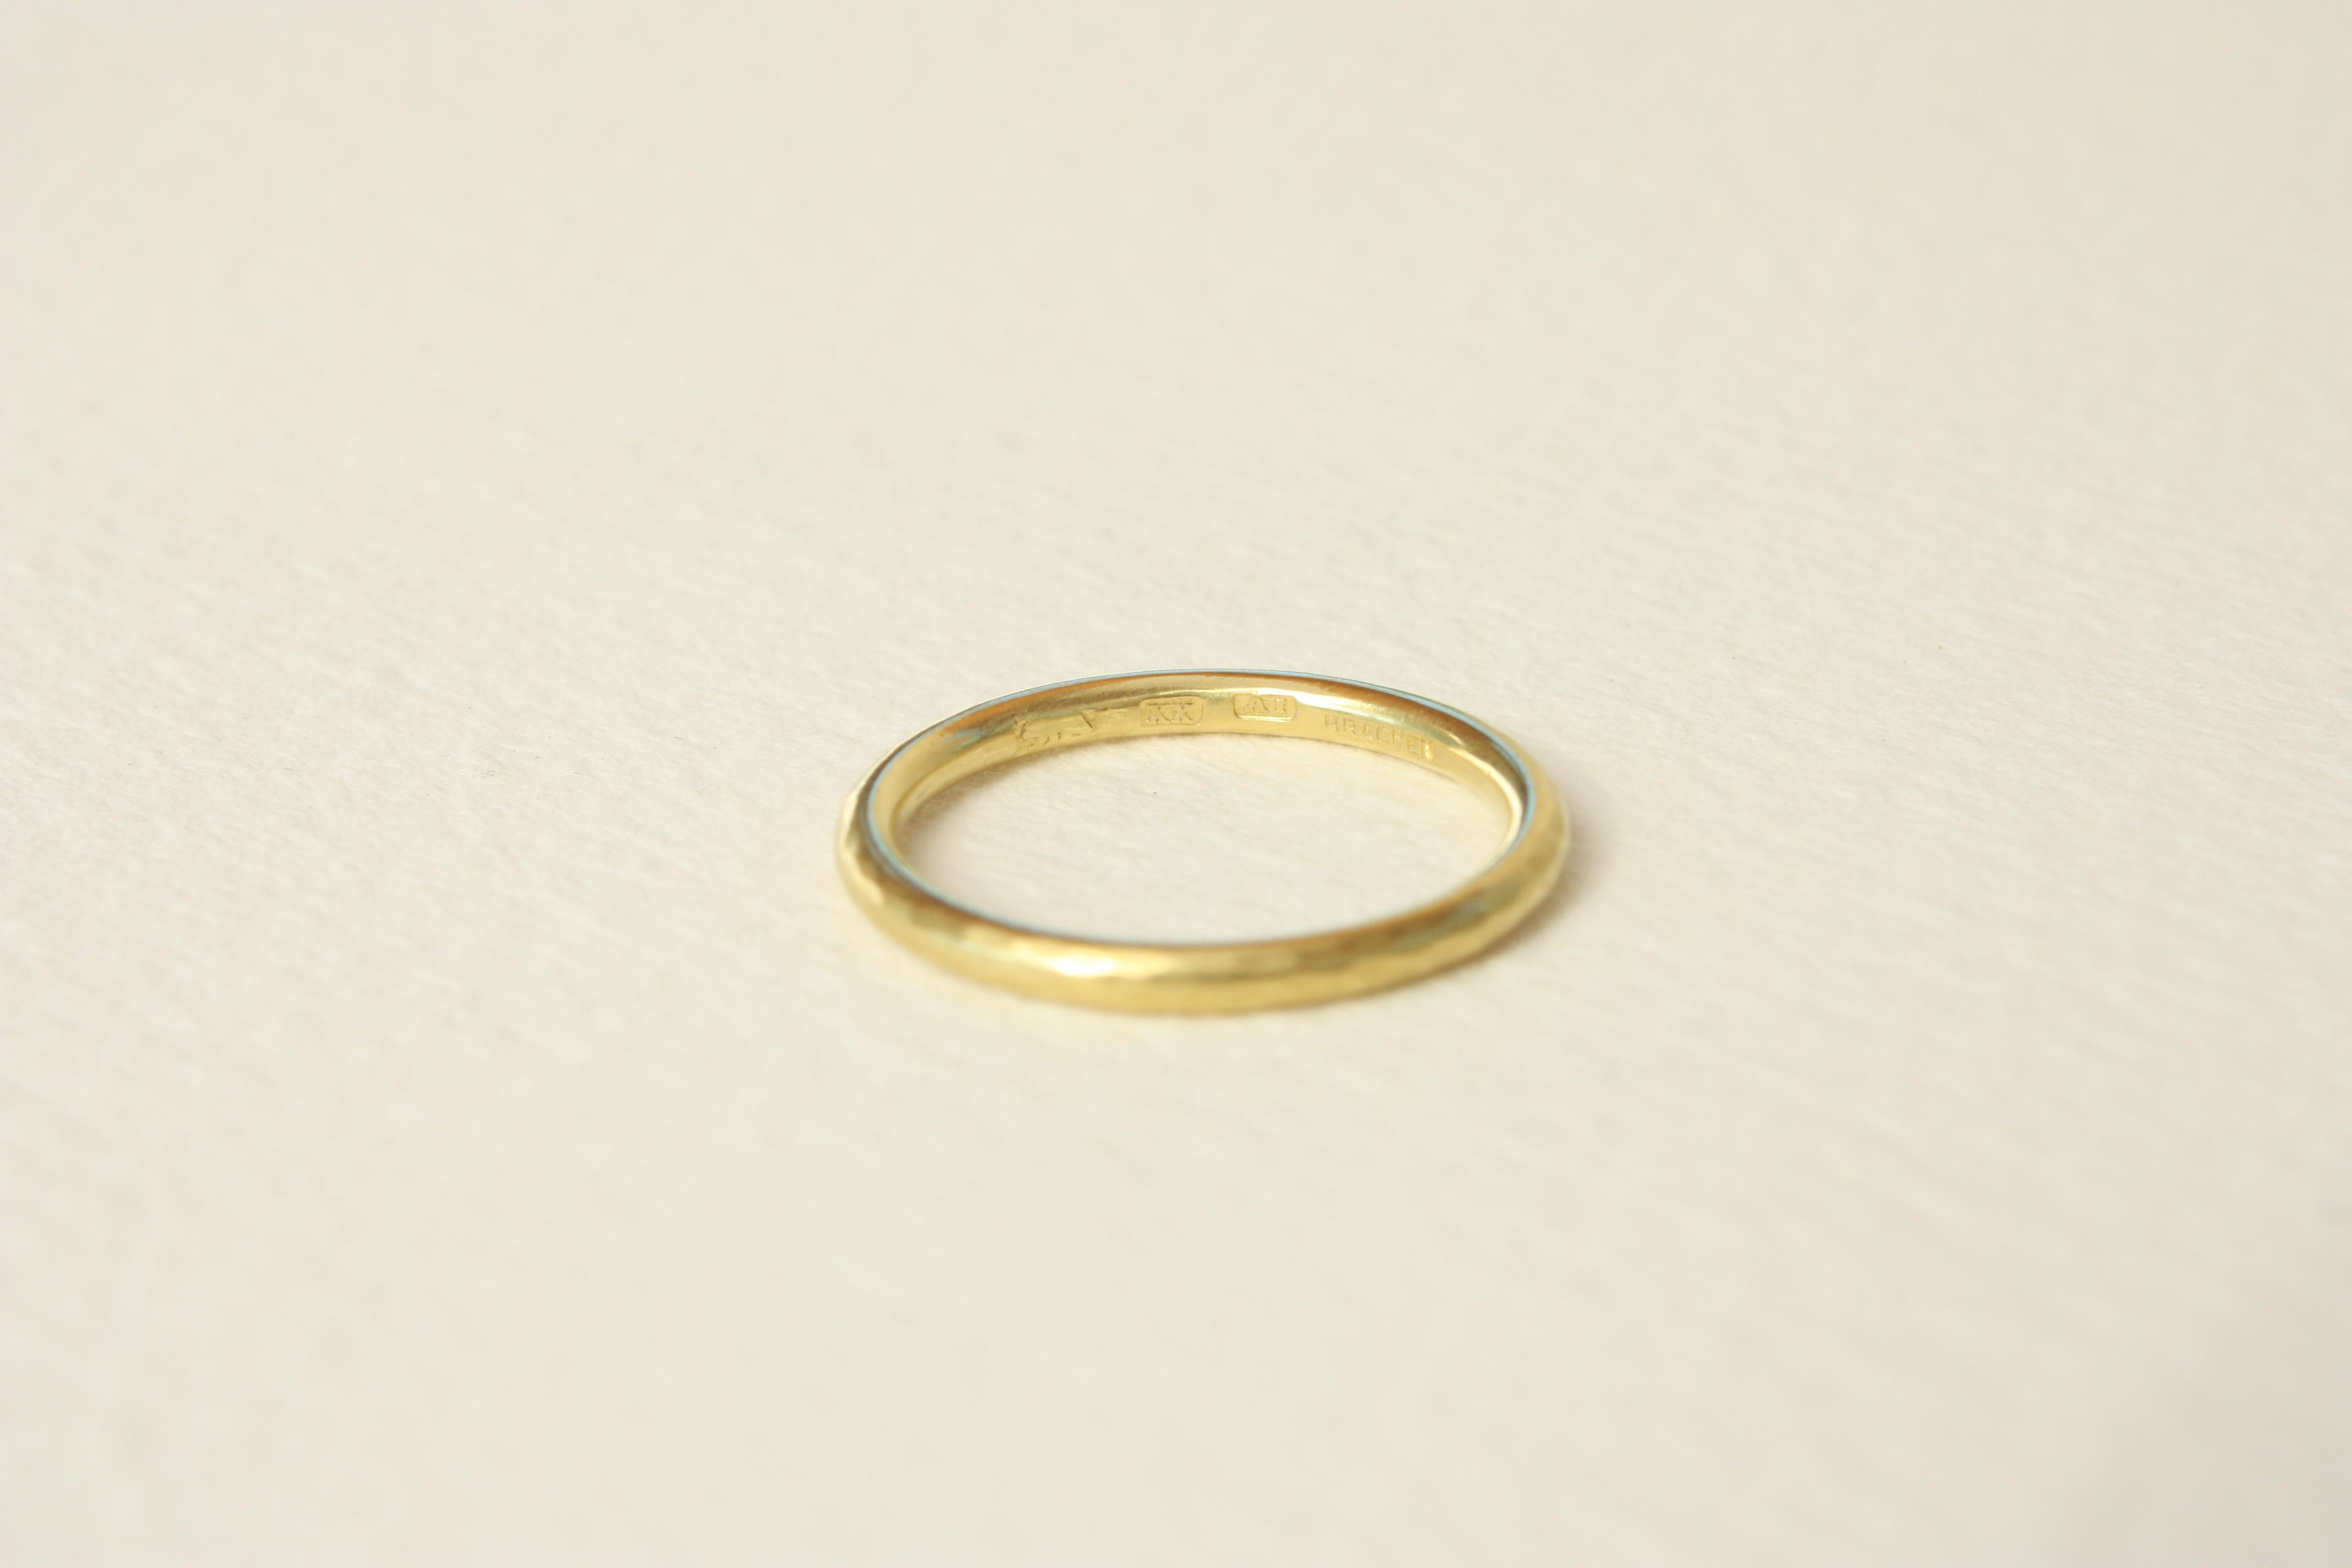 20k California Gold 1.8mm Thin Wire Hammered Wedding Band Handmade by Bracken In New Condition For Sale In Venice, CA